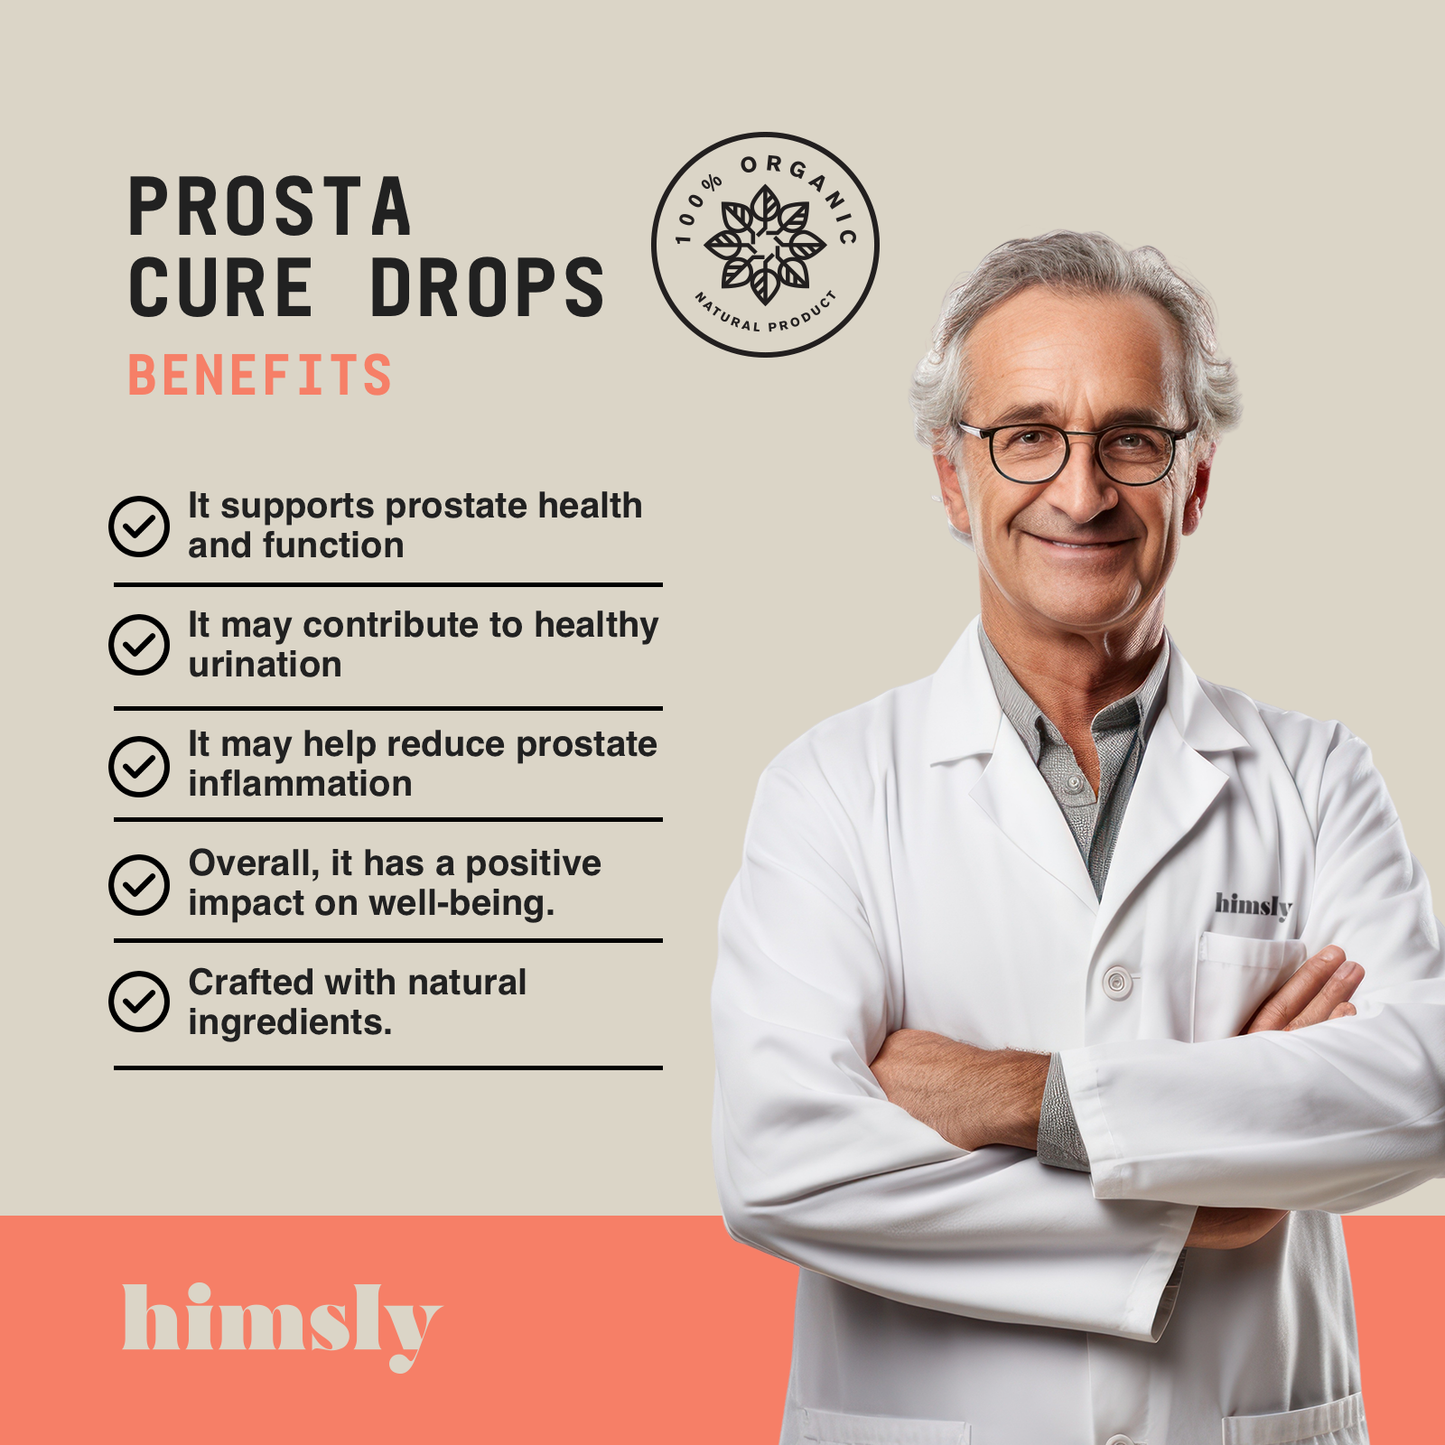 It supports prostate health and function. It may contribute to healthy urination. It may help reduce prostate inflammation.